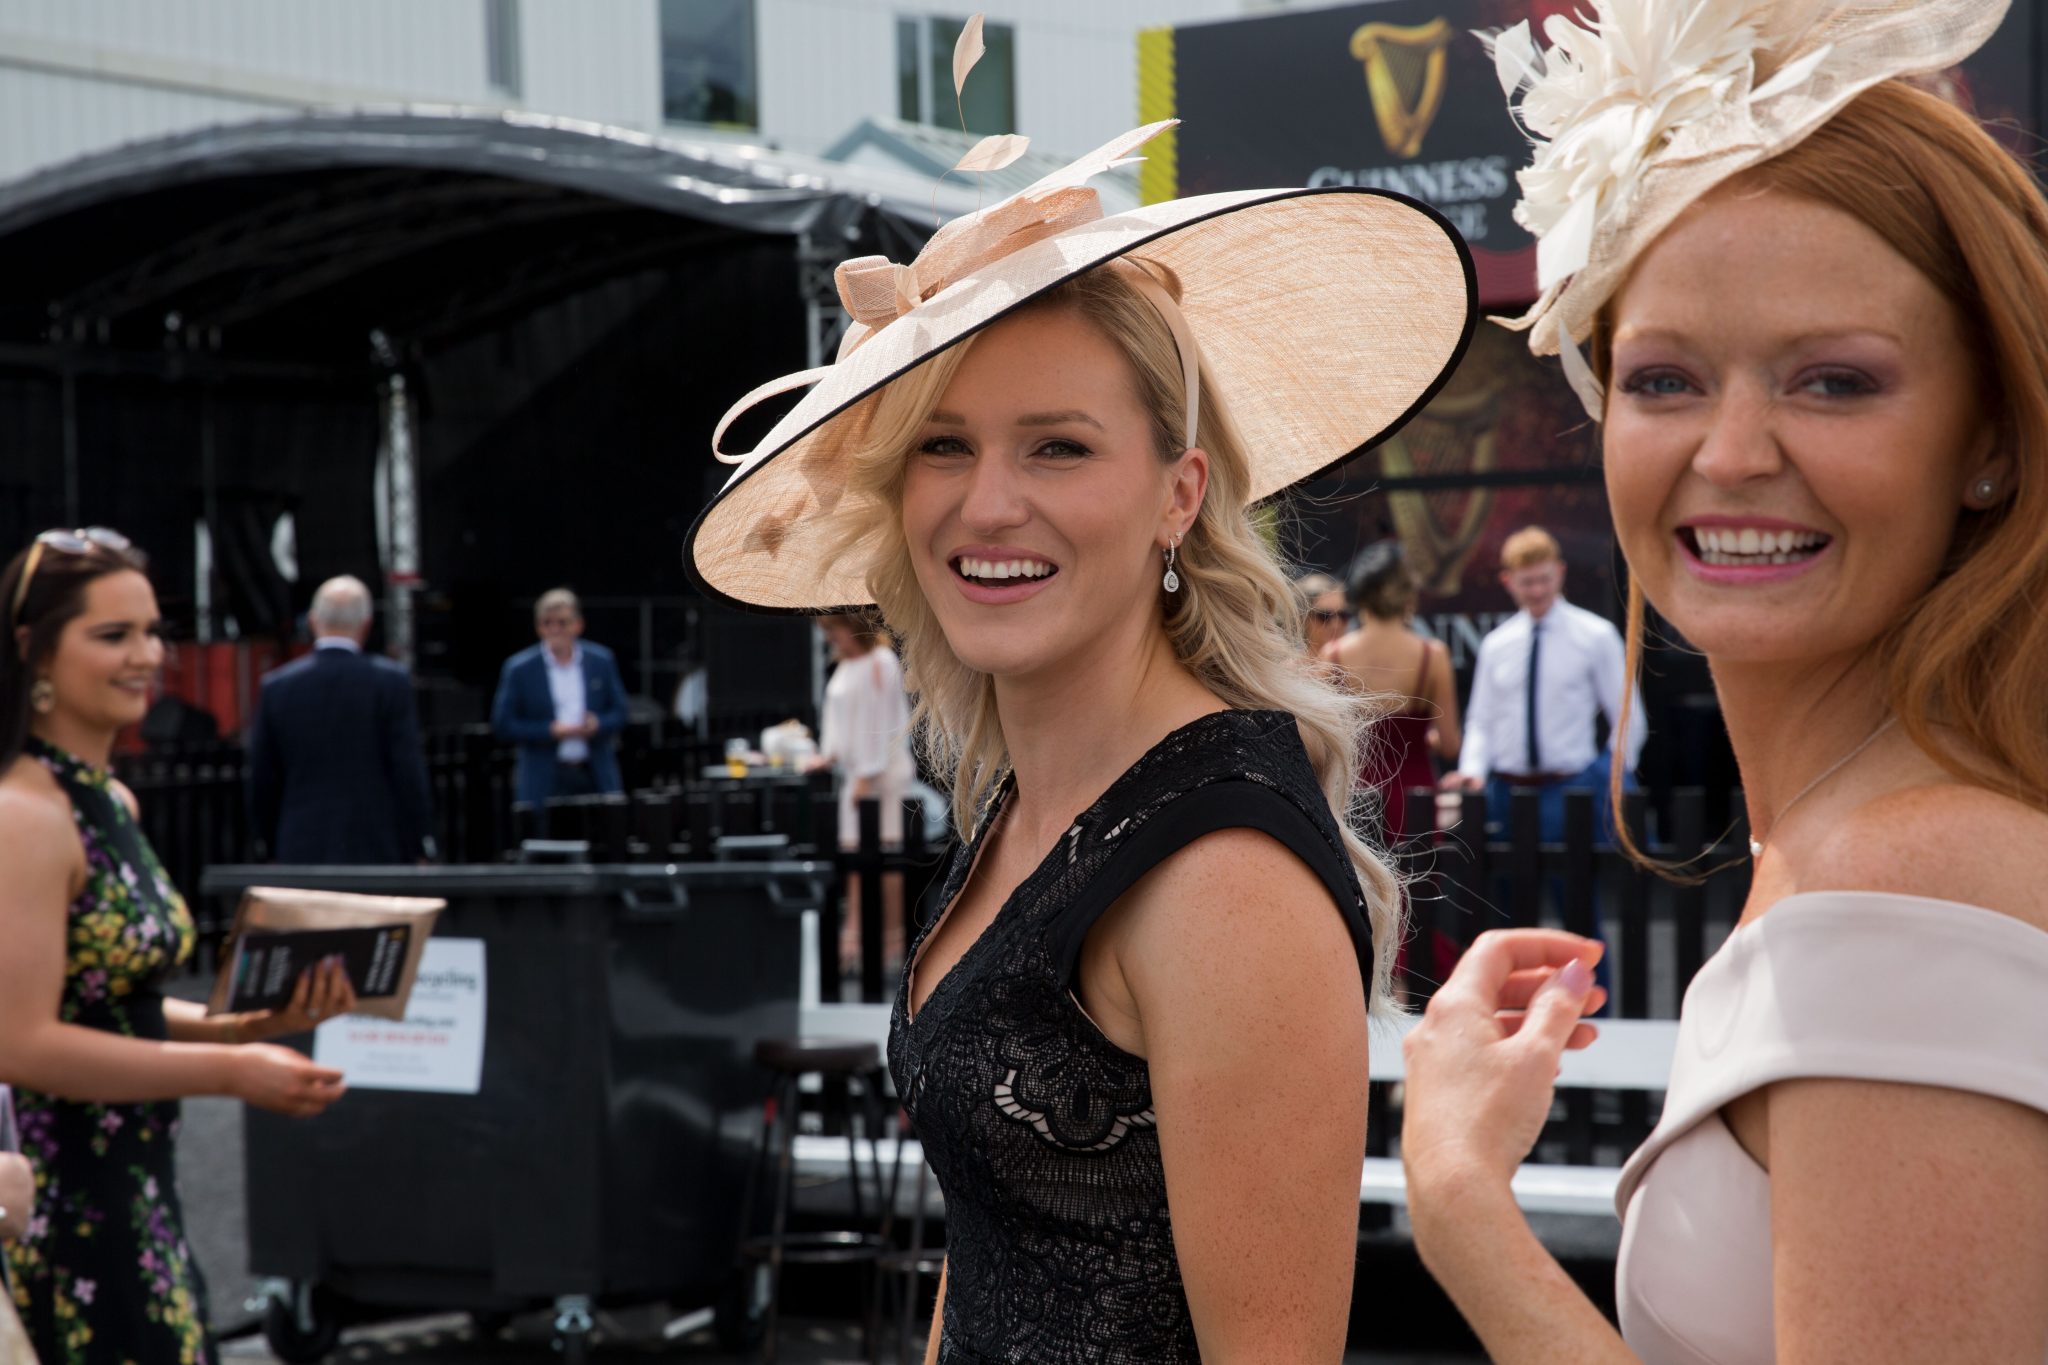 Alex Walsh enters the Ballybrit Racecourse with friends on the fifth day of the 150th Galway Races, 03-08-2019